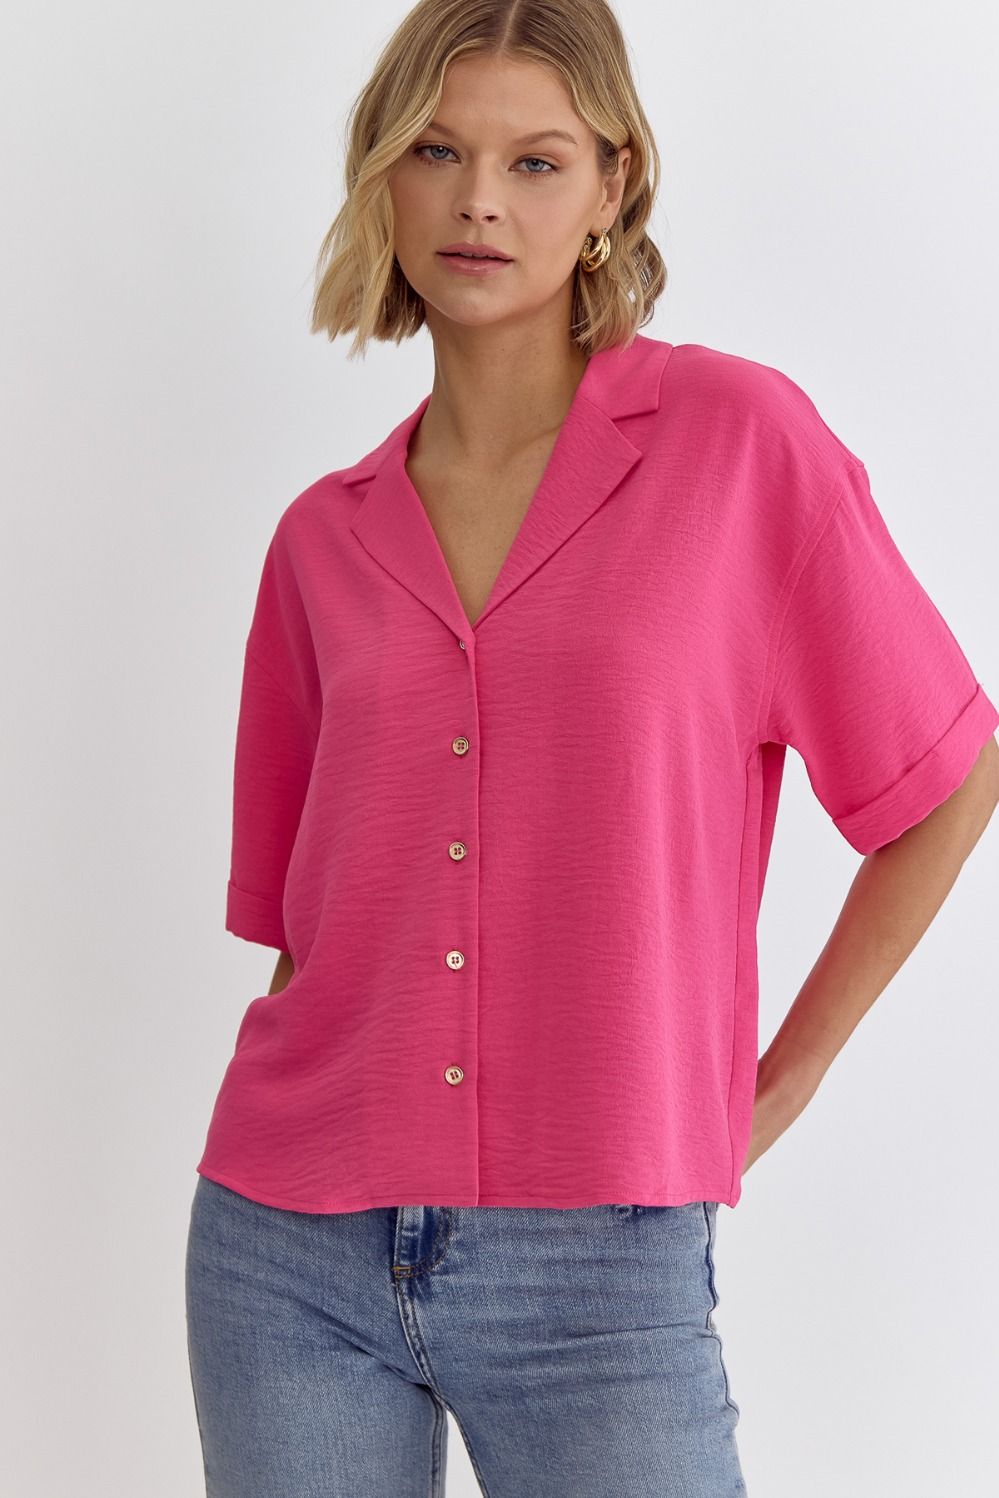 Classic button up pink entro top